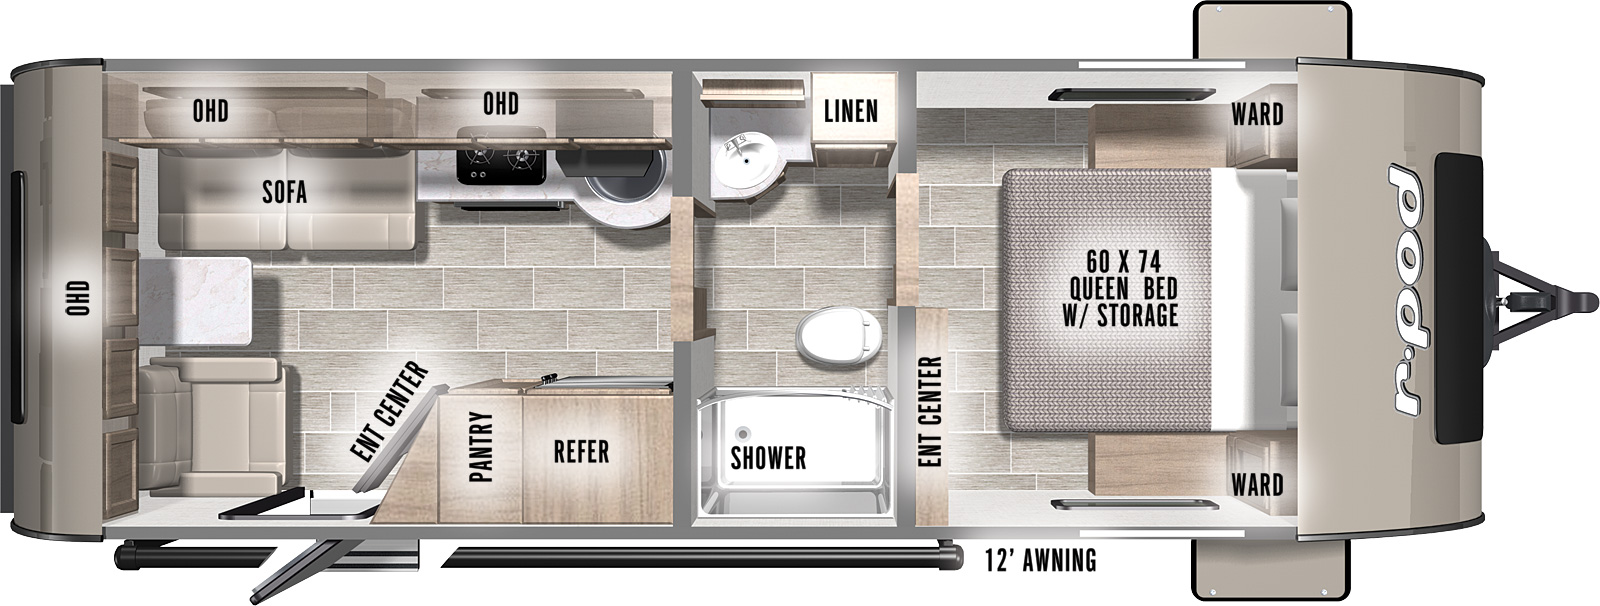 r-pod RP-201 floorplan. The RP-201 has no slide outs and one entry door.